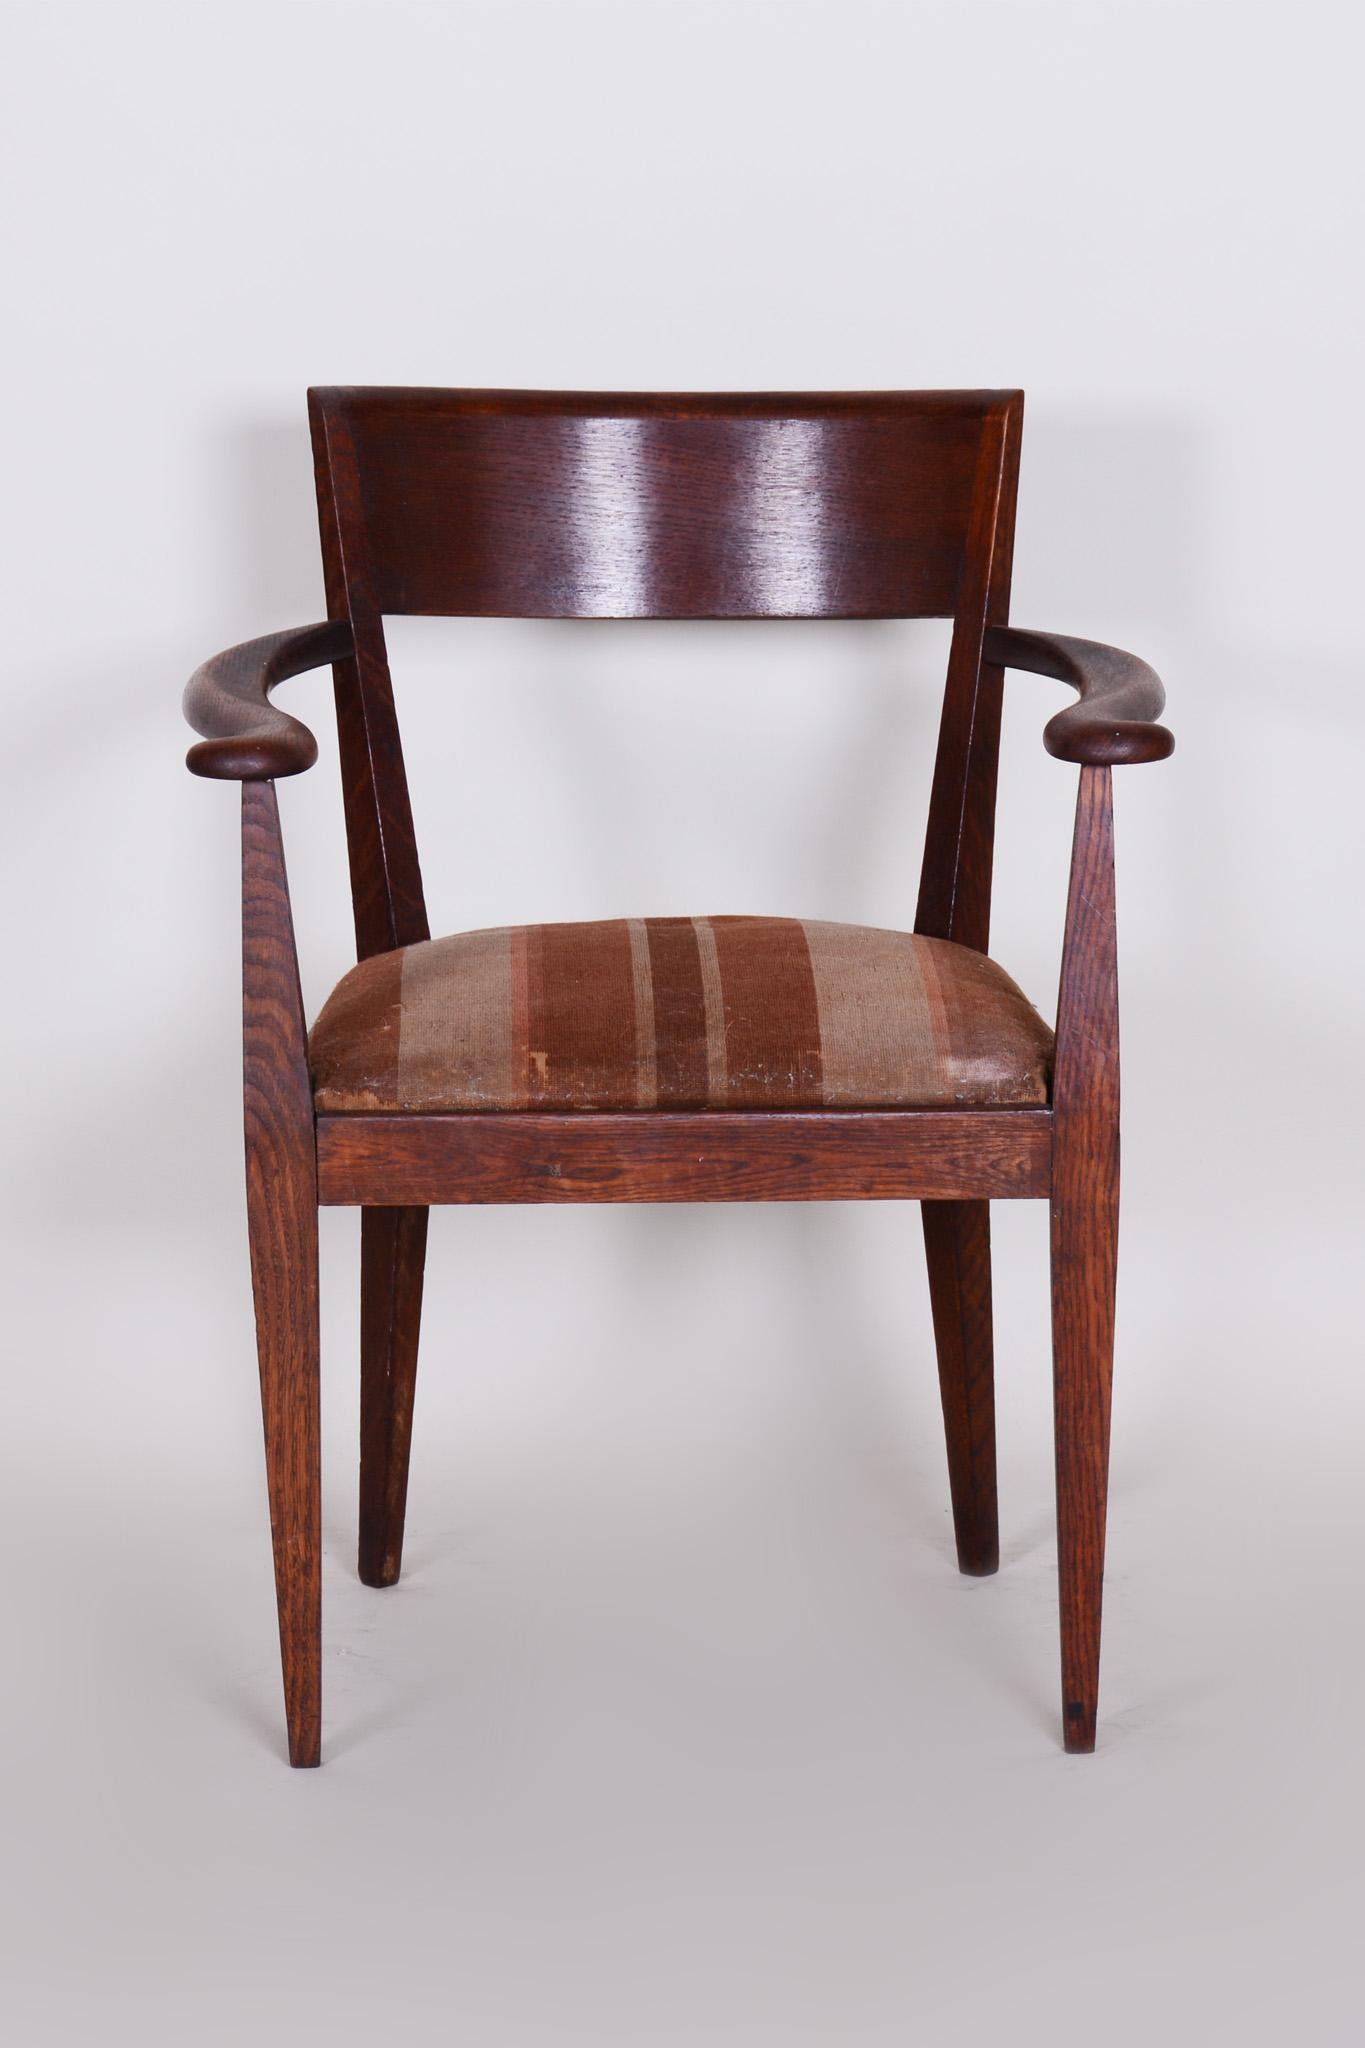 Brown Oak Cubist Art Deco Armchair, Original Well Preserved Condition, 1920s For Sale 1